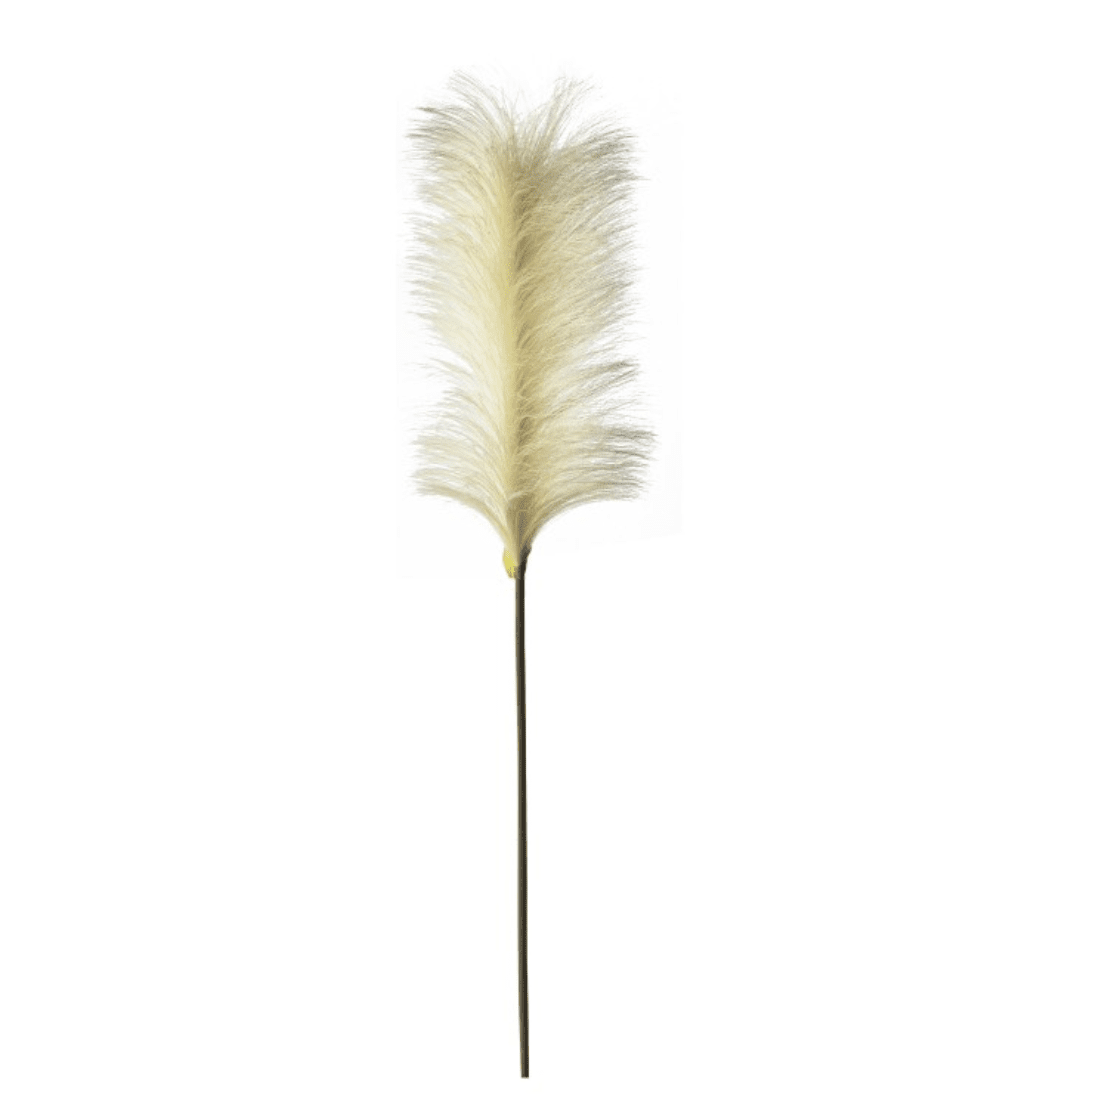 Tall Feather Stem - Cream - Pack of 5 - Outlet - Save 20%